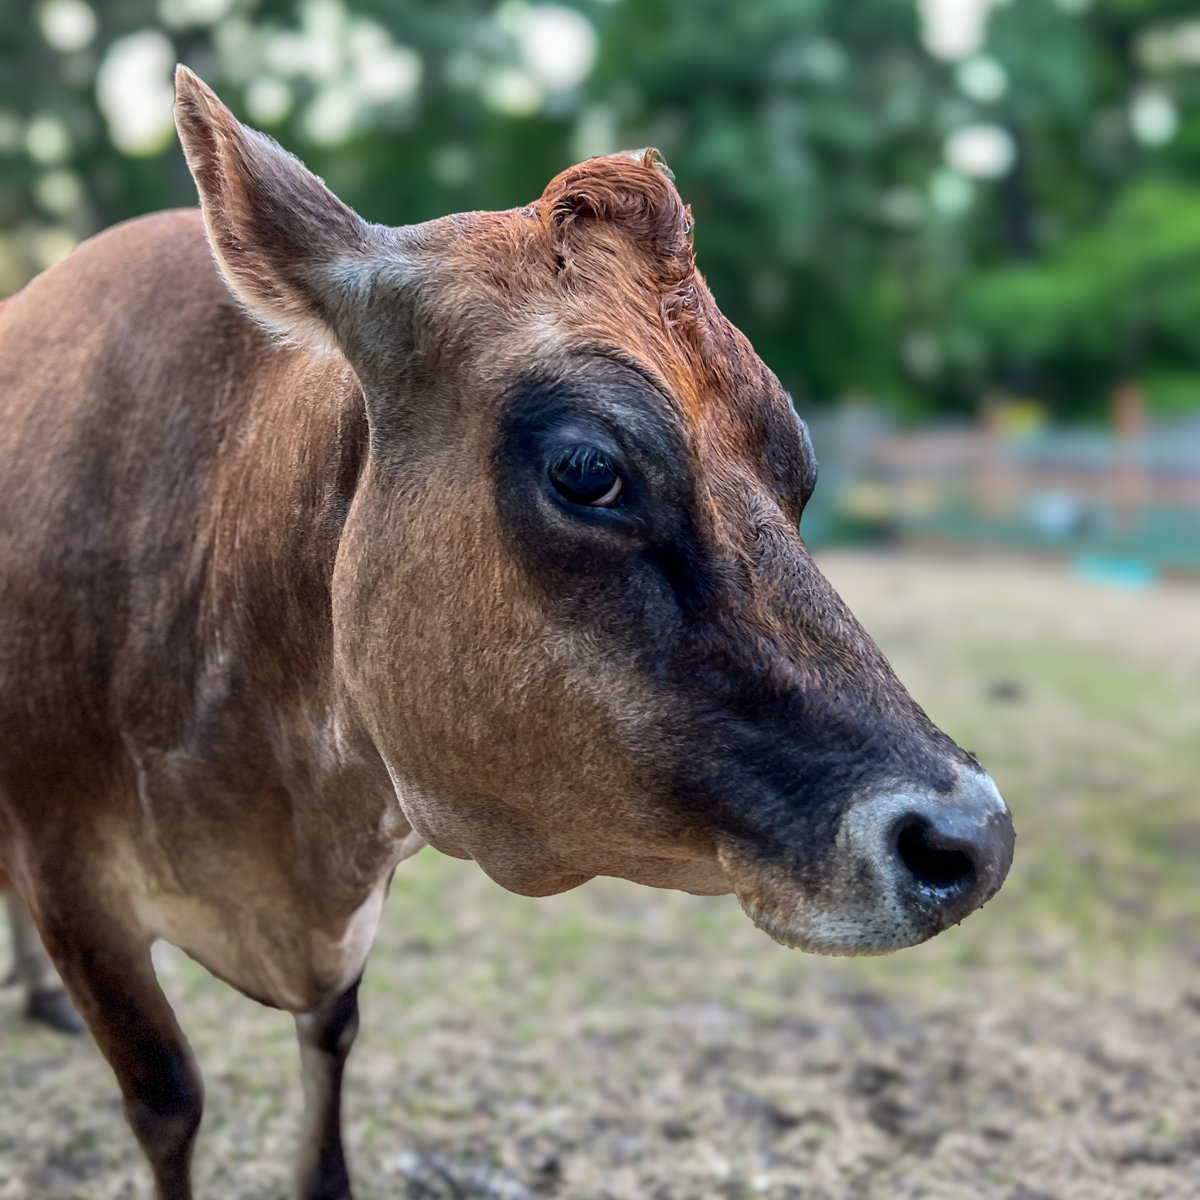 Ever noticed how some folks just wake up ready for the spotlight? That's Maisie for you! Our glamorous Jersey cow at Life With Pigs always looks like she’s stepped straight out of a beauty salon. Who else feels a little jealous that Maisie never has a bad eyeliner day?